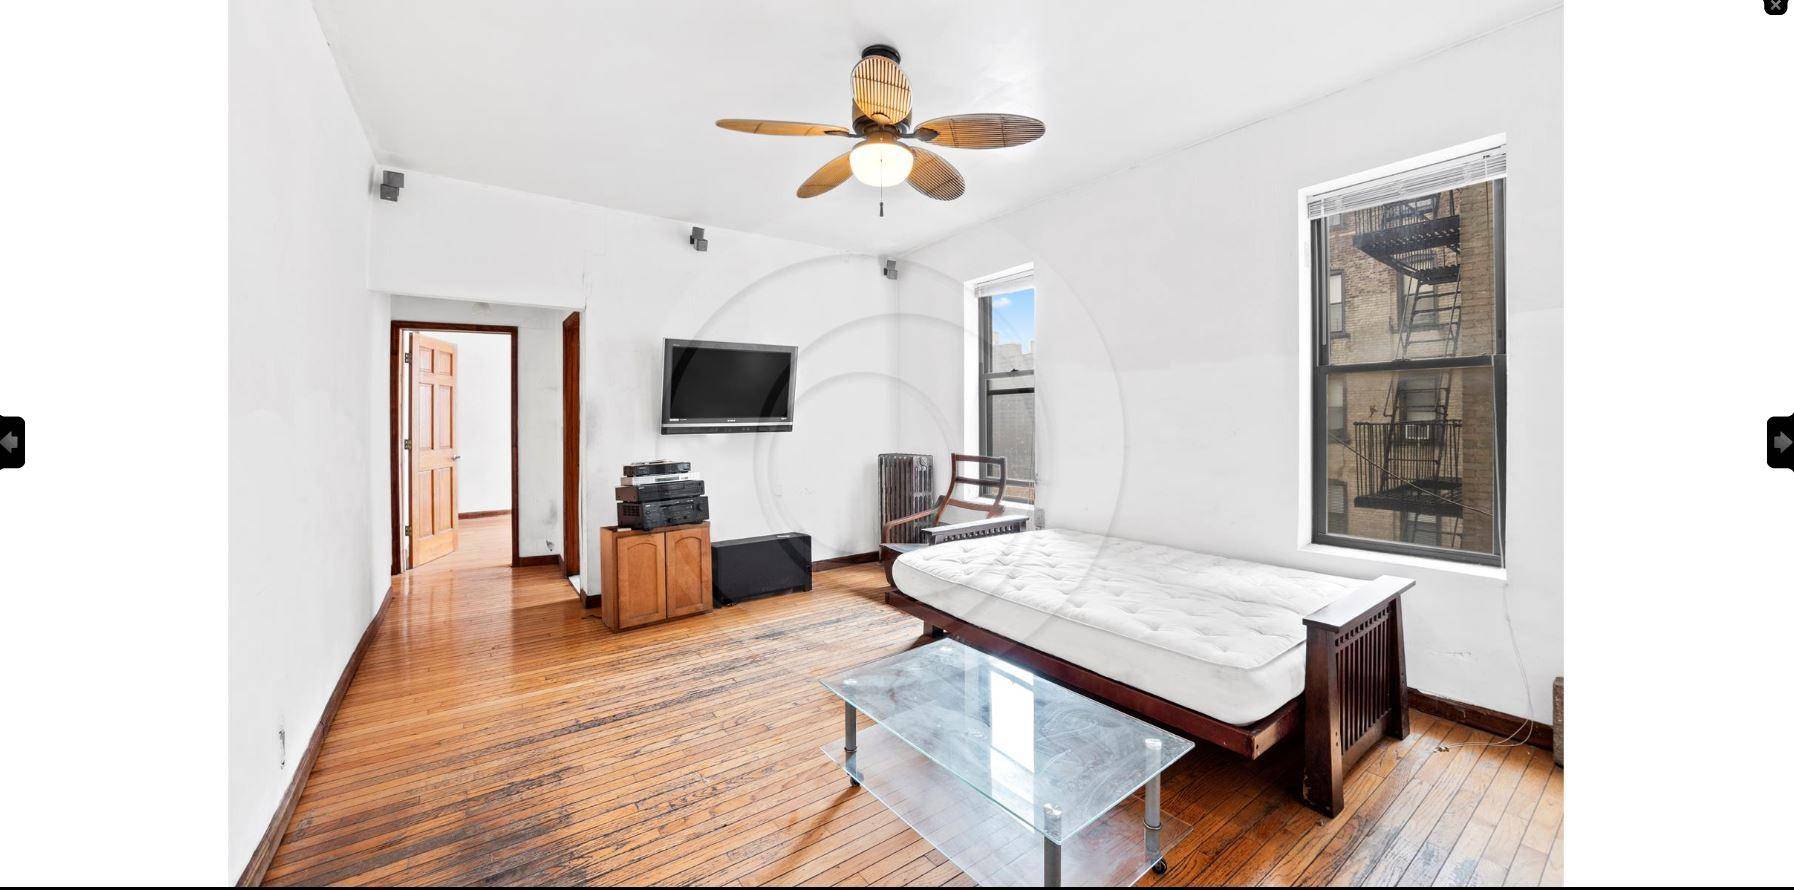 Douglas Elliman is delighted to bring to the market this bright, spacious prewar 2 bedroom co op located close to Prospect Park, Botanic gardens amp ; 2, 3, 4, and ...